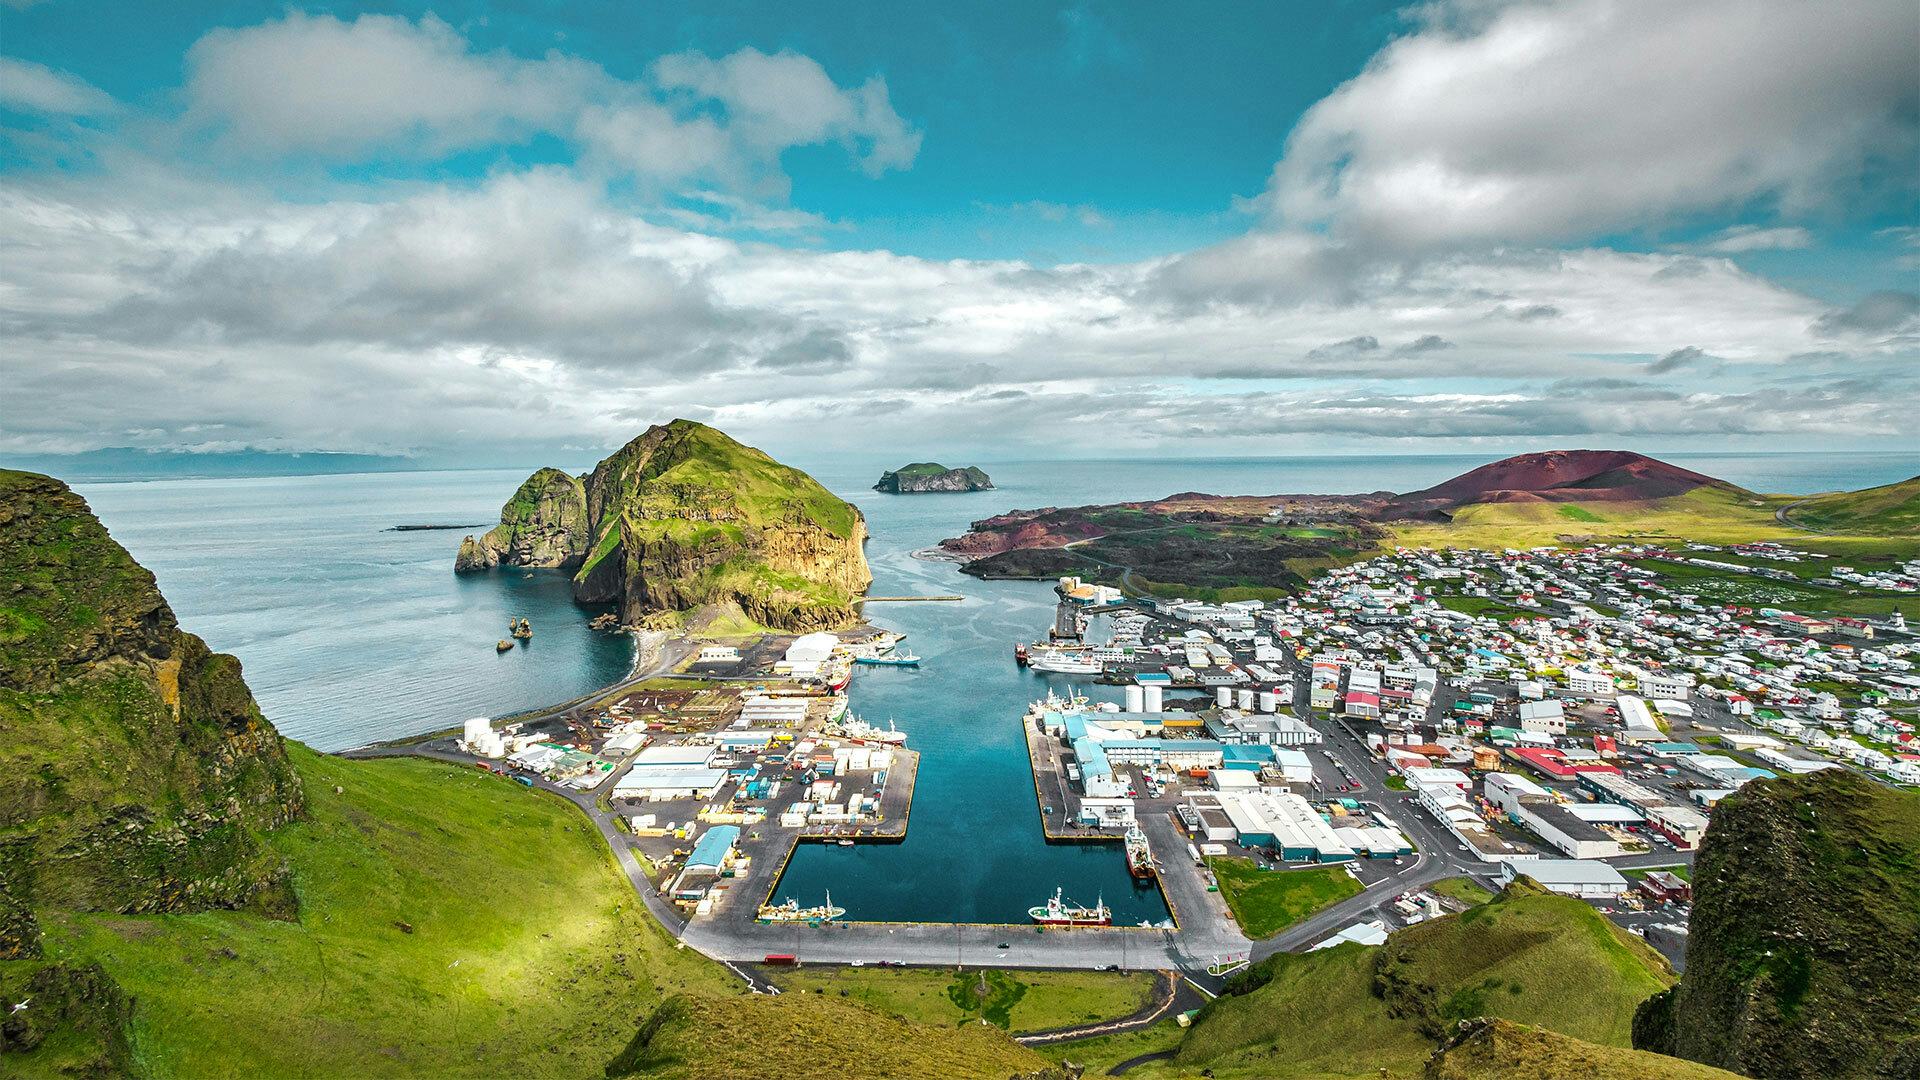 Aerial view of the Vestmanna Islands, seen from land and out to sea. A small town by the sea, mountains and grasslands